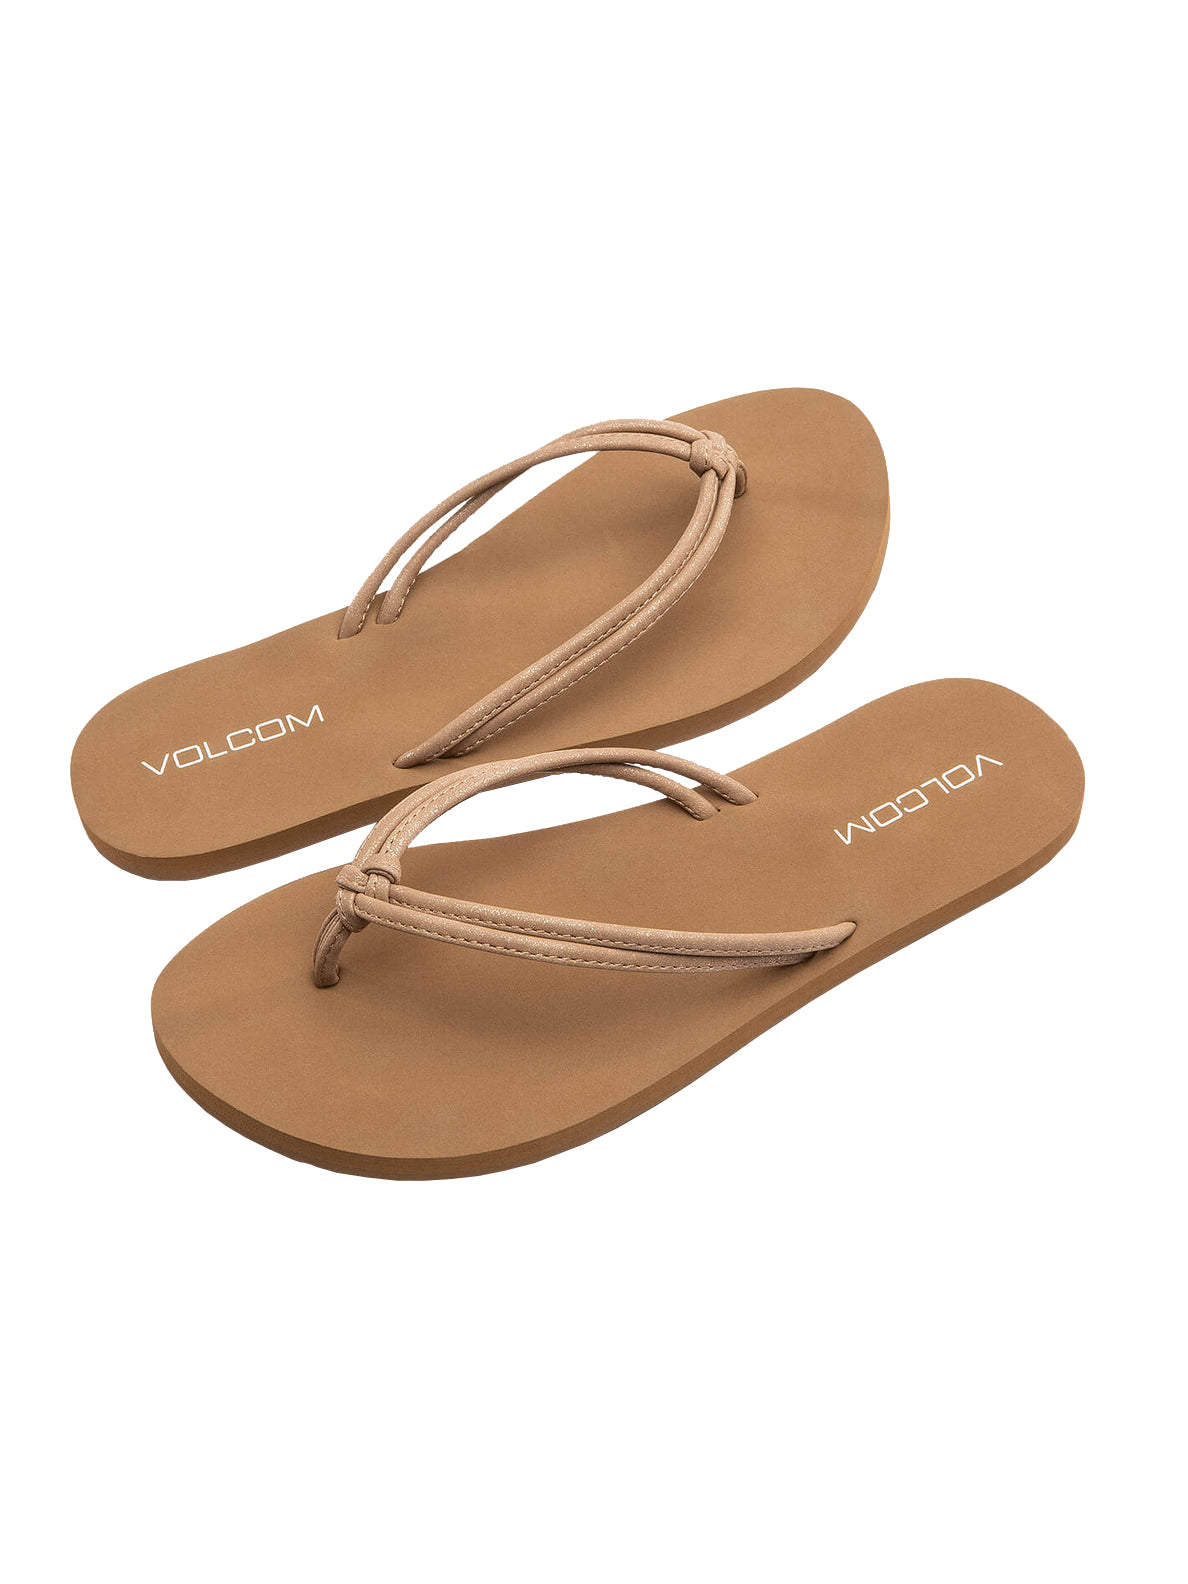 Volcom Forever and Ever 2 Womens Sandal TAN-Tan 6